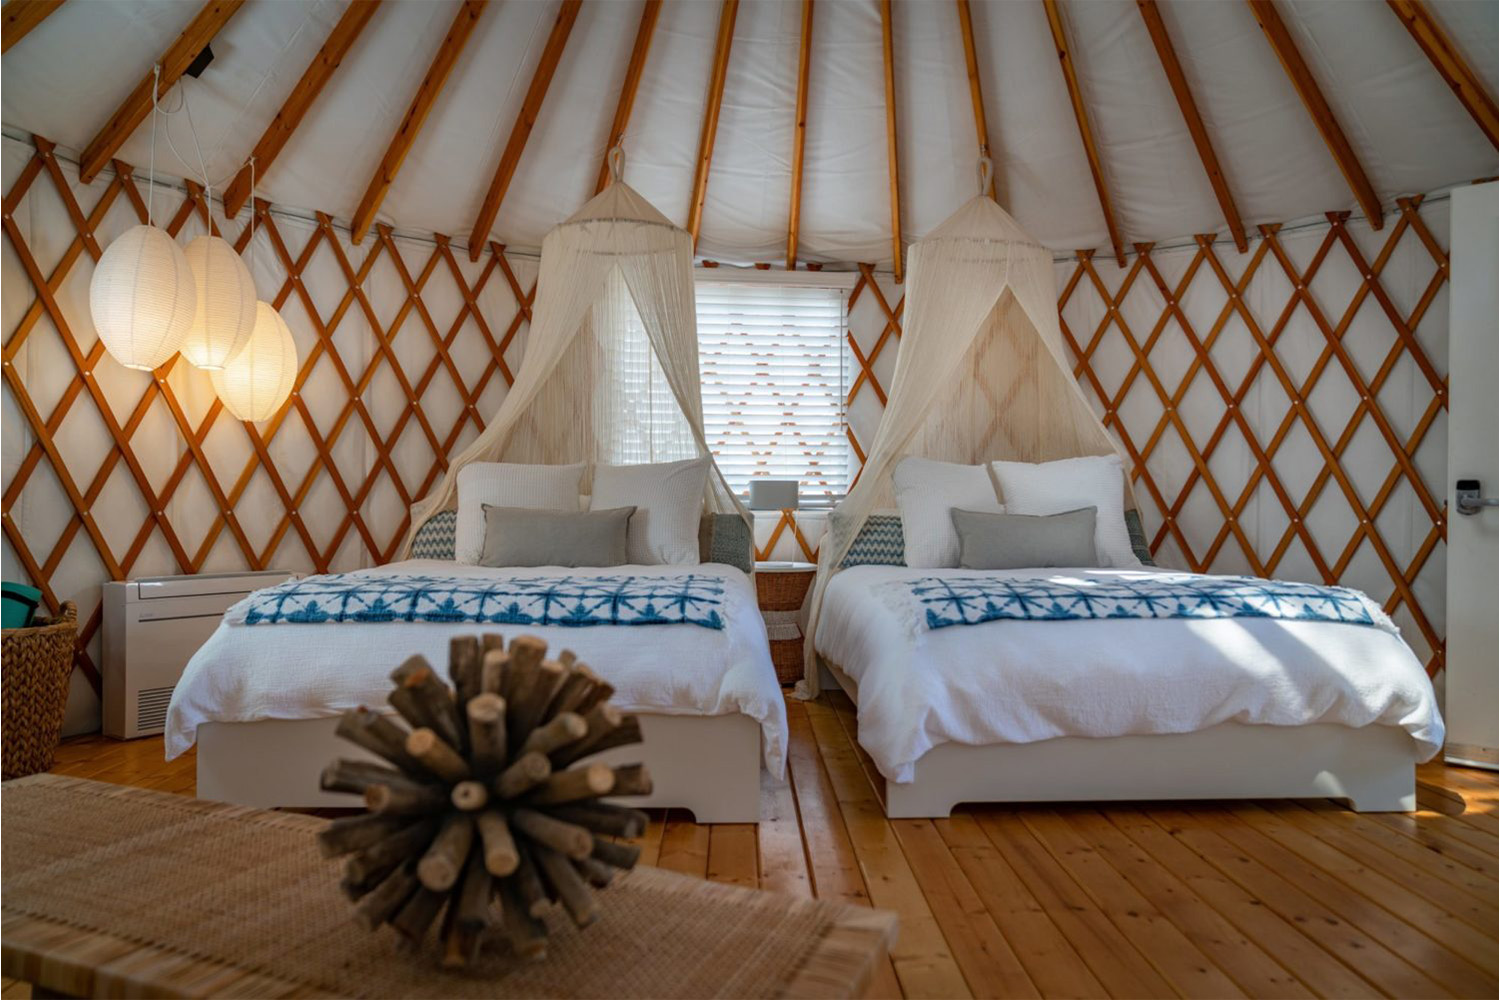 Interior of a Yurt, Launch Pointe